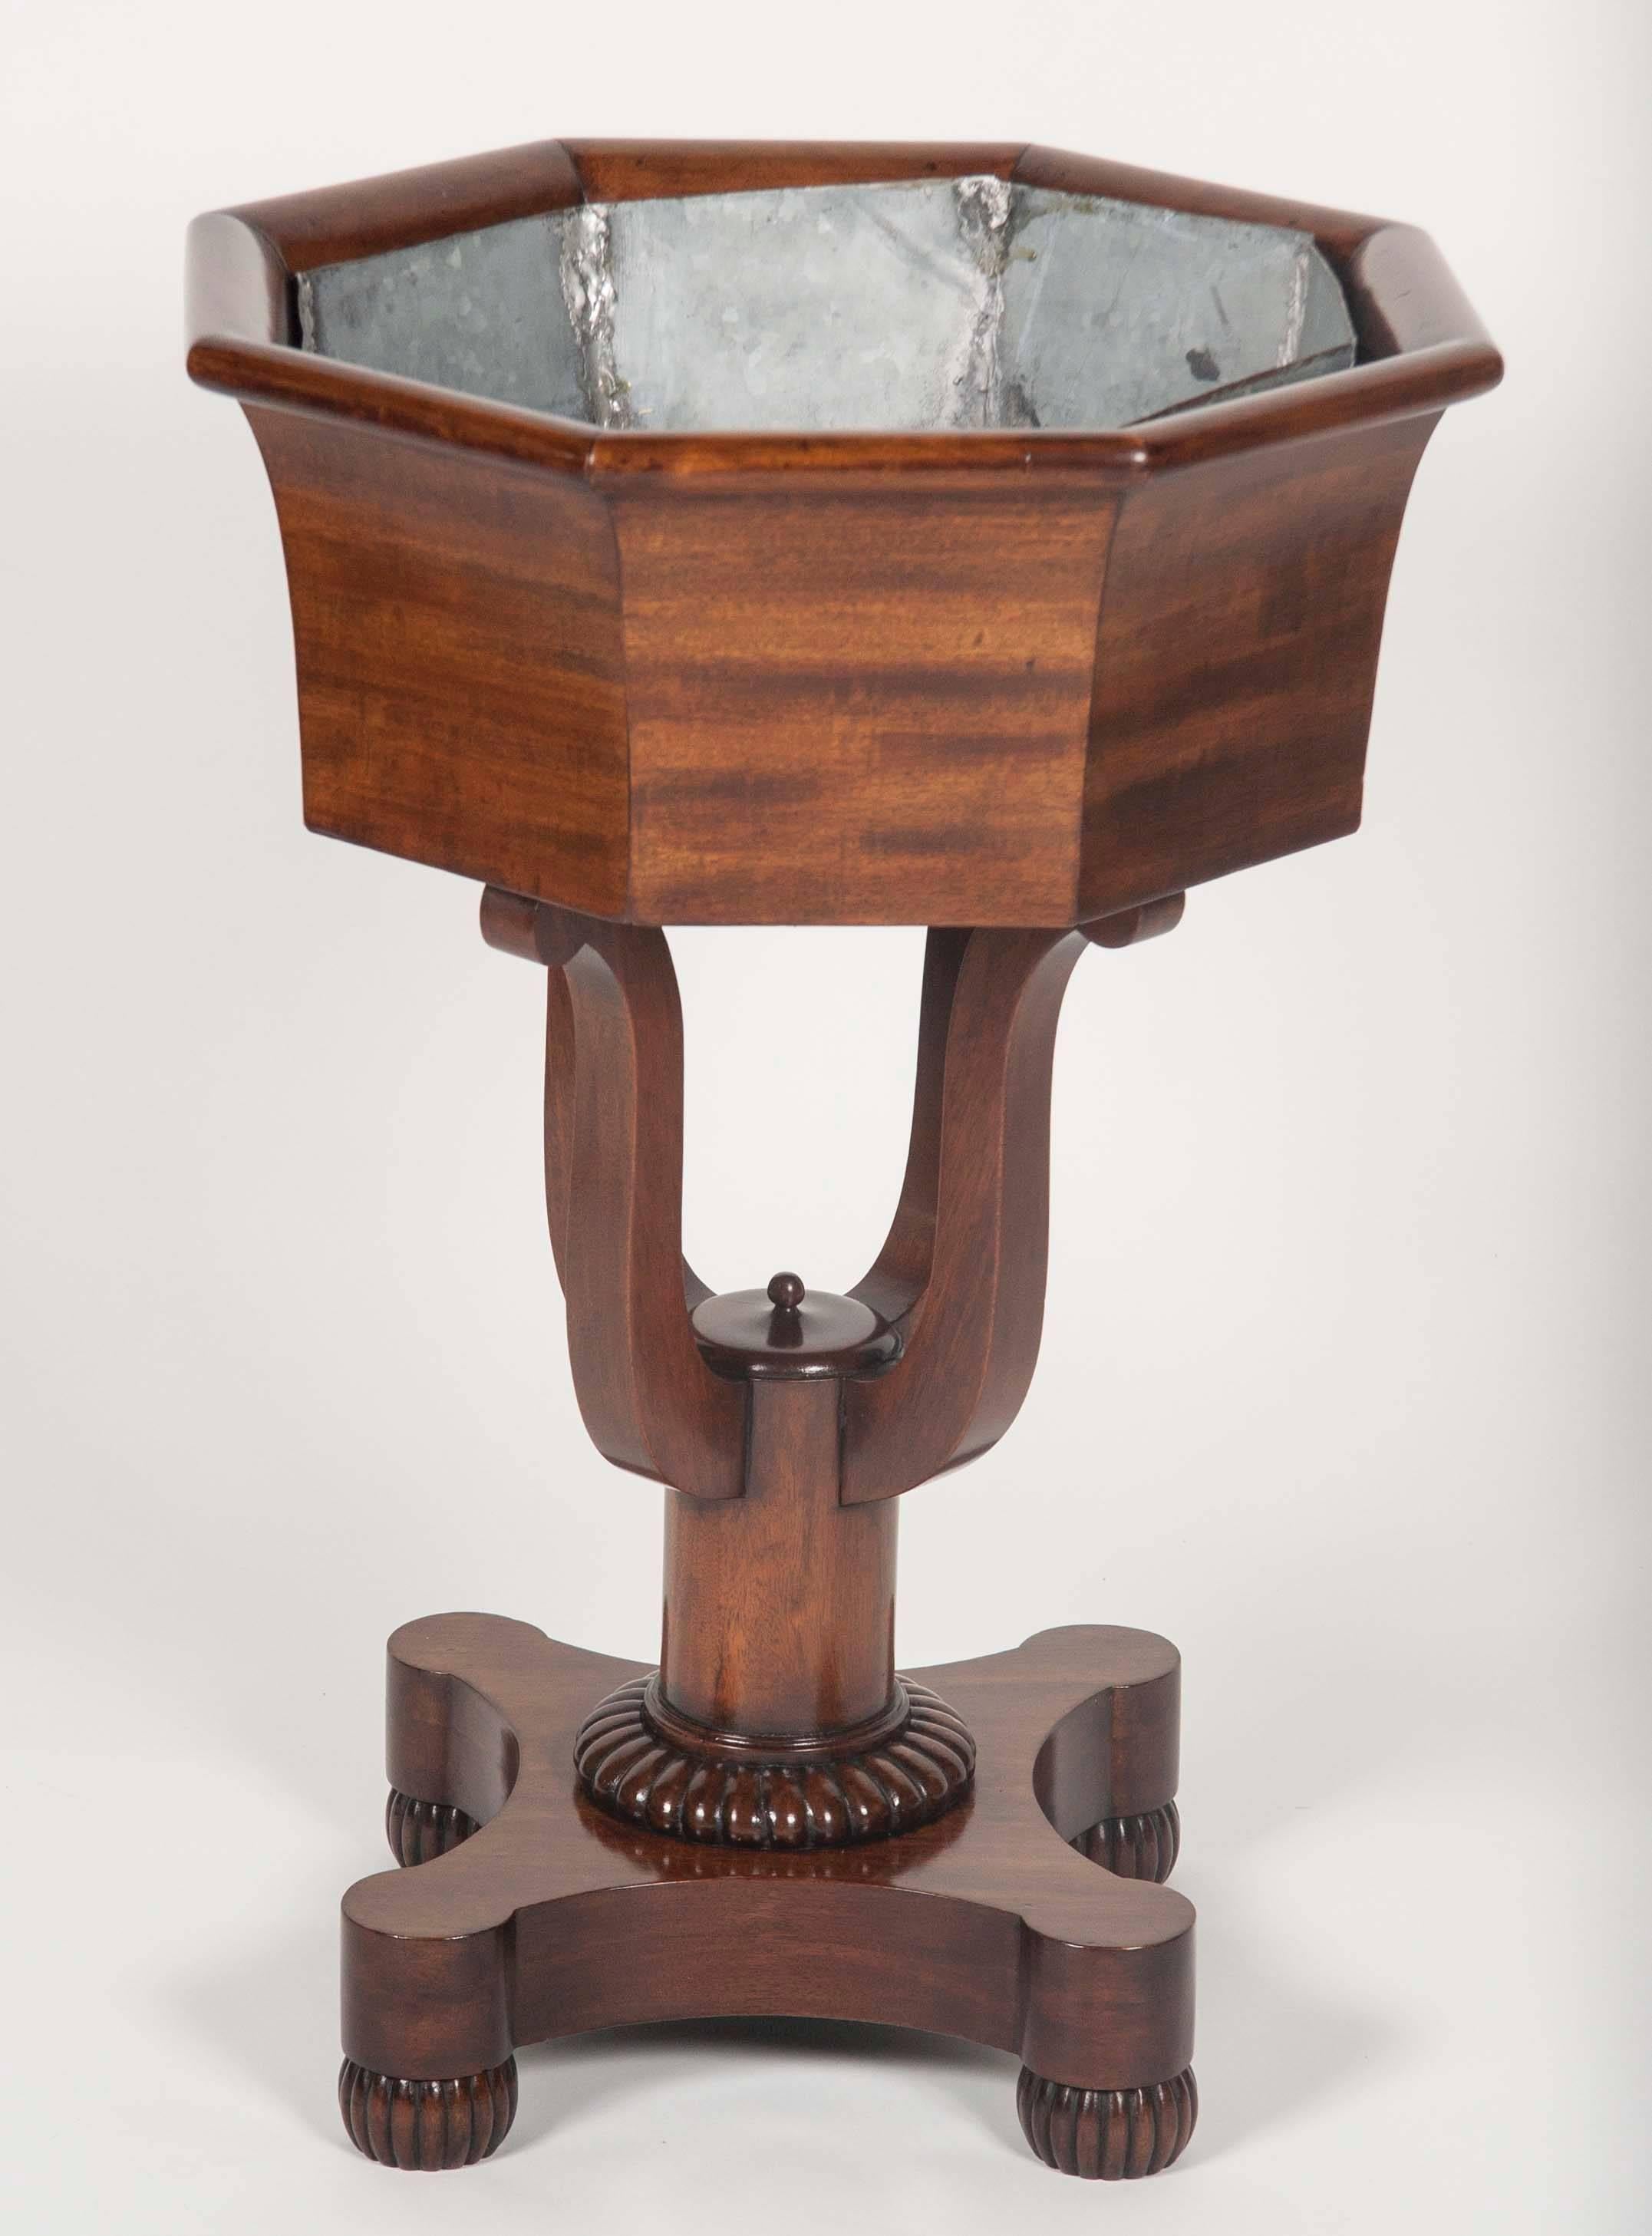 An American mahogany octagonal faceted jardinière with galvanized liner. The planter supported by four scroll form arms jointed to a single cylindrical plinth base terminating in a gadrooned pedestal on four gadrooned bun feet.